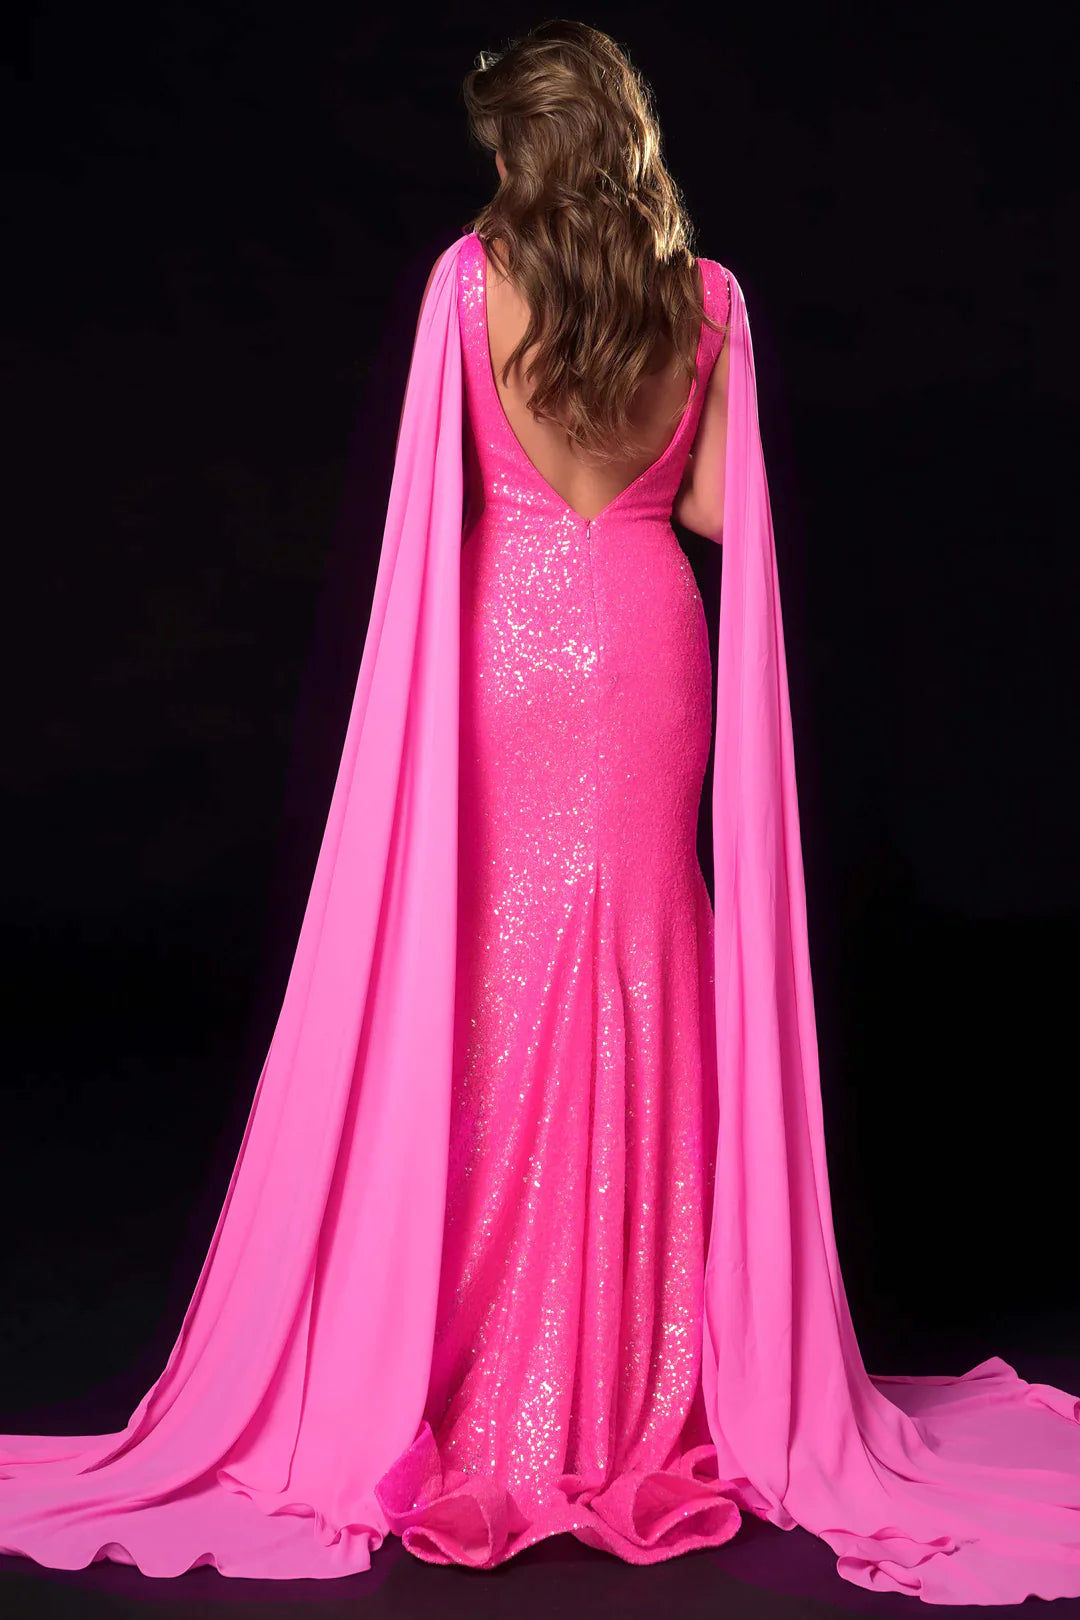 Ava Presley 37346 is the perfect choice for the discerning pageant or prom goer. Featuring a long, fitted mermaid silhouette decorated with dazzling sequins and detachable cape sleeves, this gown also has a V-neck cut and sheer mesh side panels. Its elegant design is sure to turn heads.  Sizes: 0-26  Colors: Red, Royal, Black, Neon Orange, Neon Hot pink